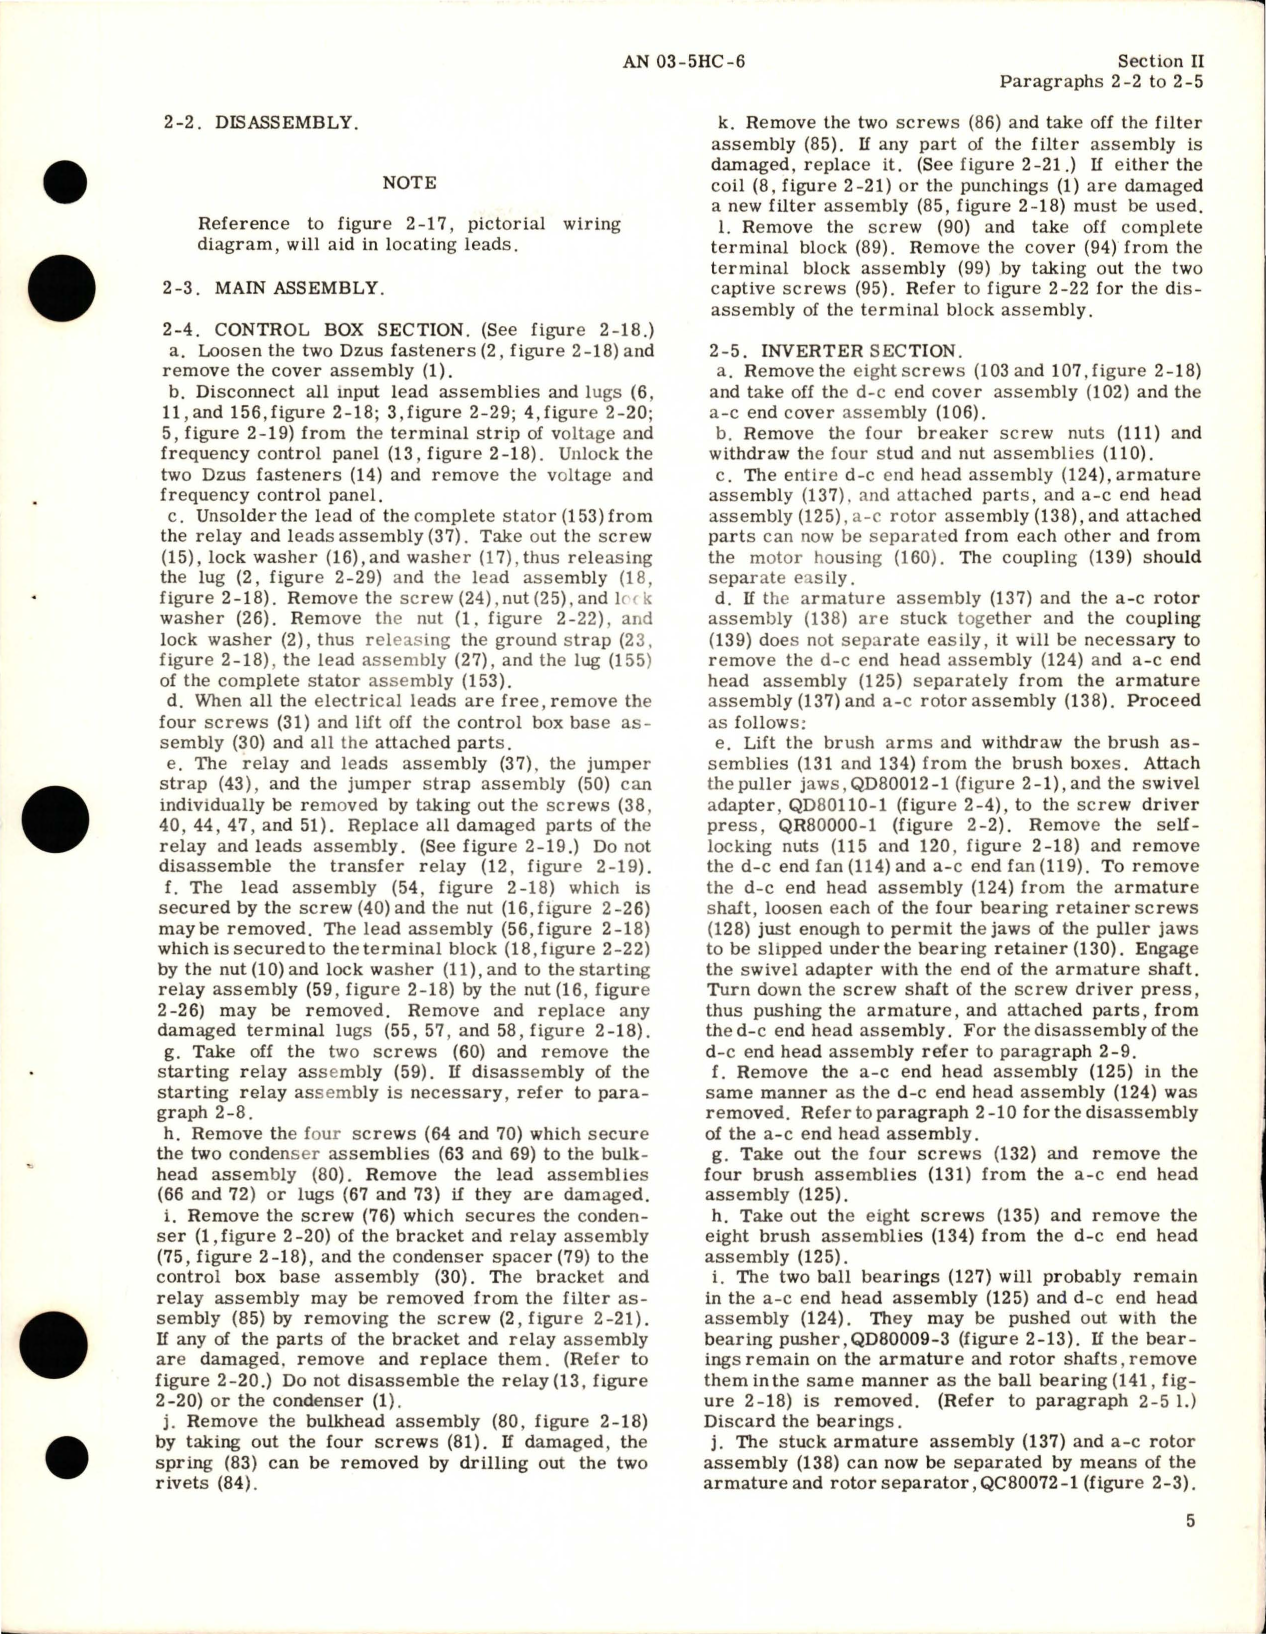 Sample page 9 from AirCorps Library document: Overhaul Instructions for Inverter - Models 1518-1-F, -G, -H